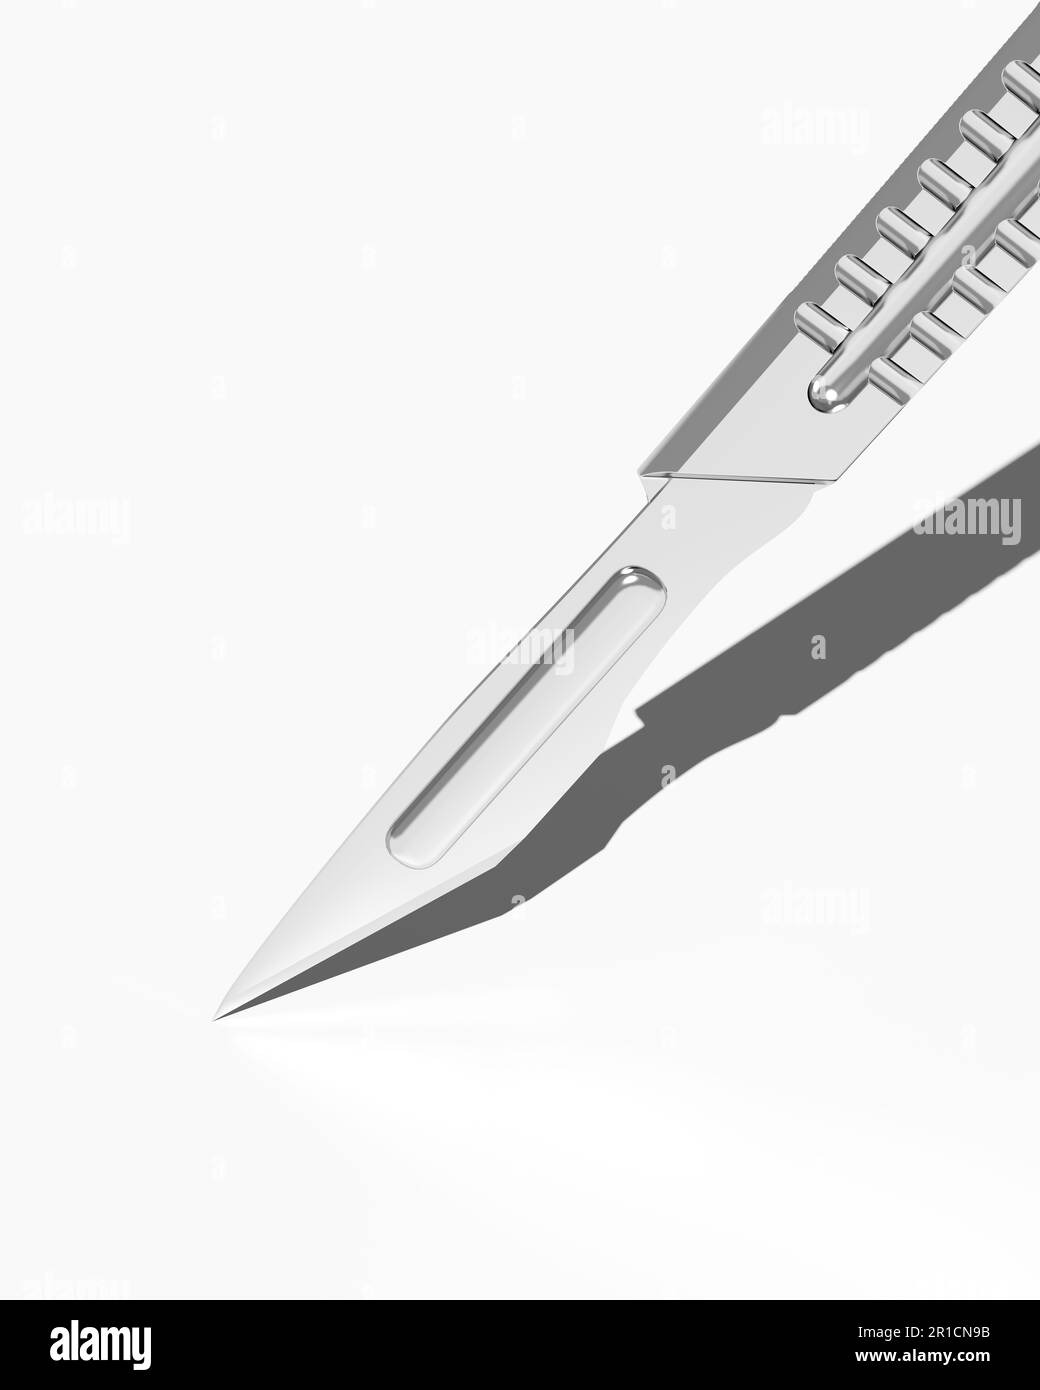 Scalpel Blade Surgical Instrument Angled Close up Surgery Precision Stainless Steal Equipment Specialized Medical Cutting Health Care White Background Stock Photo